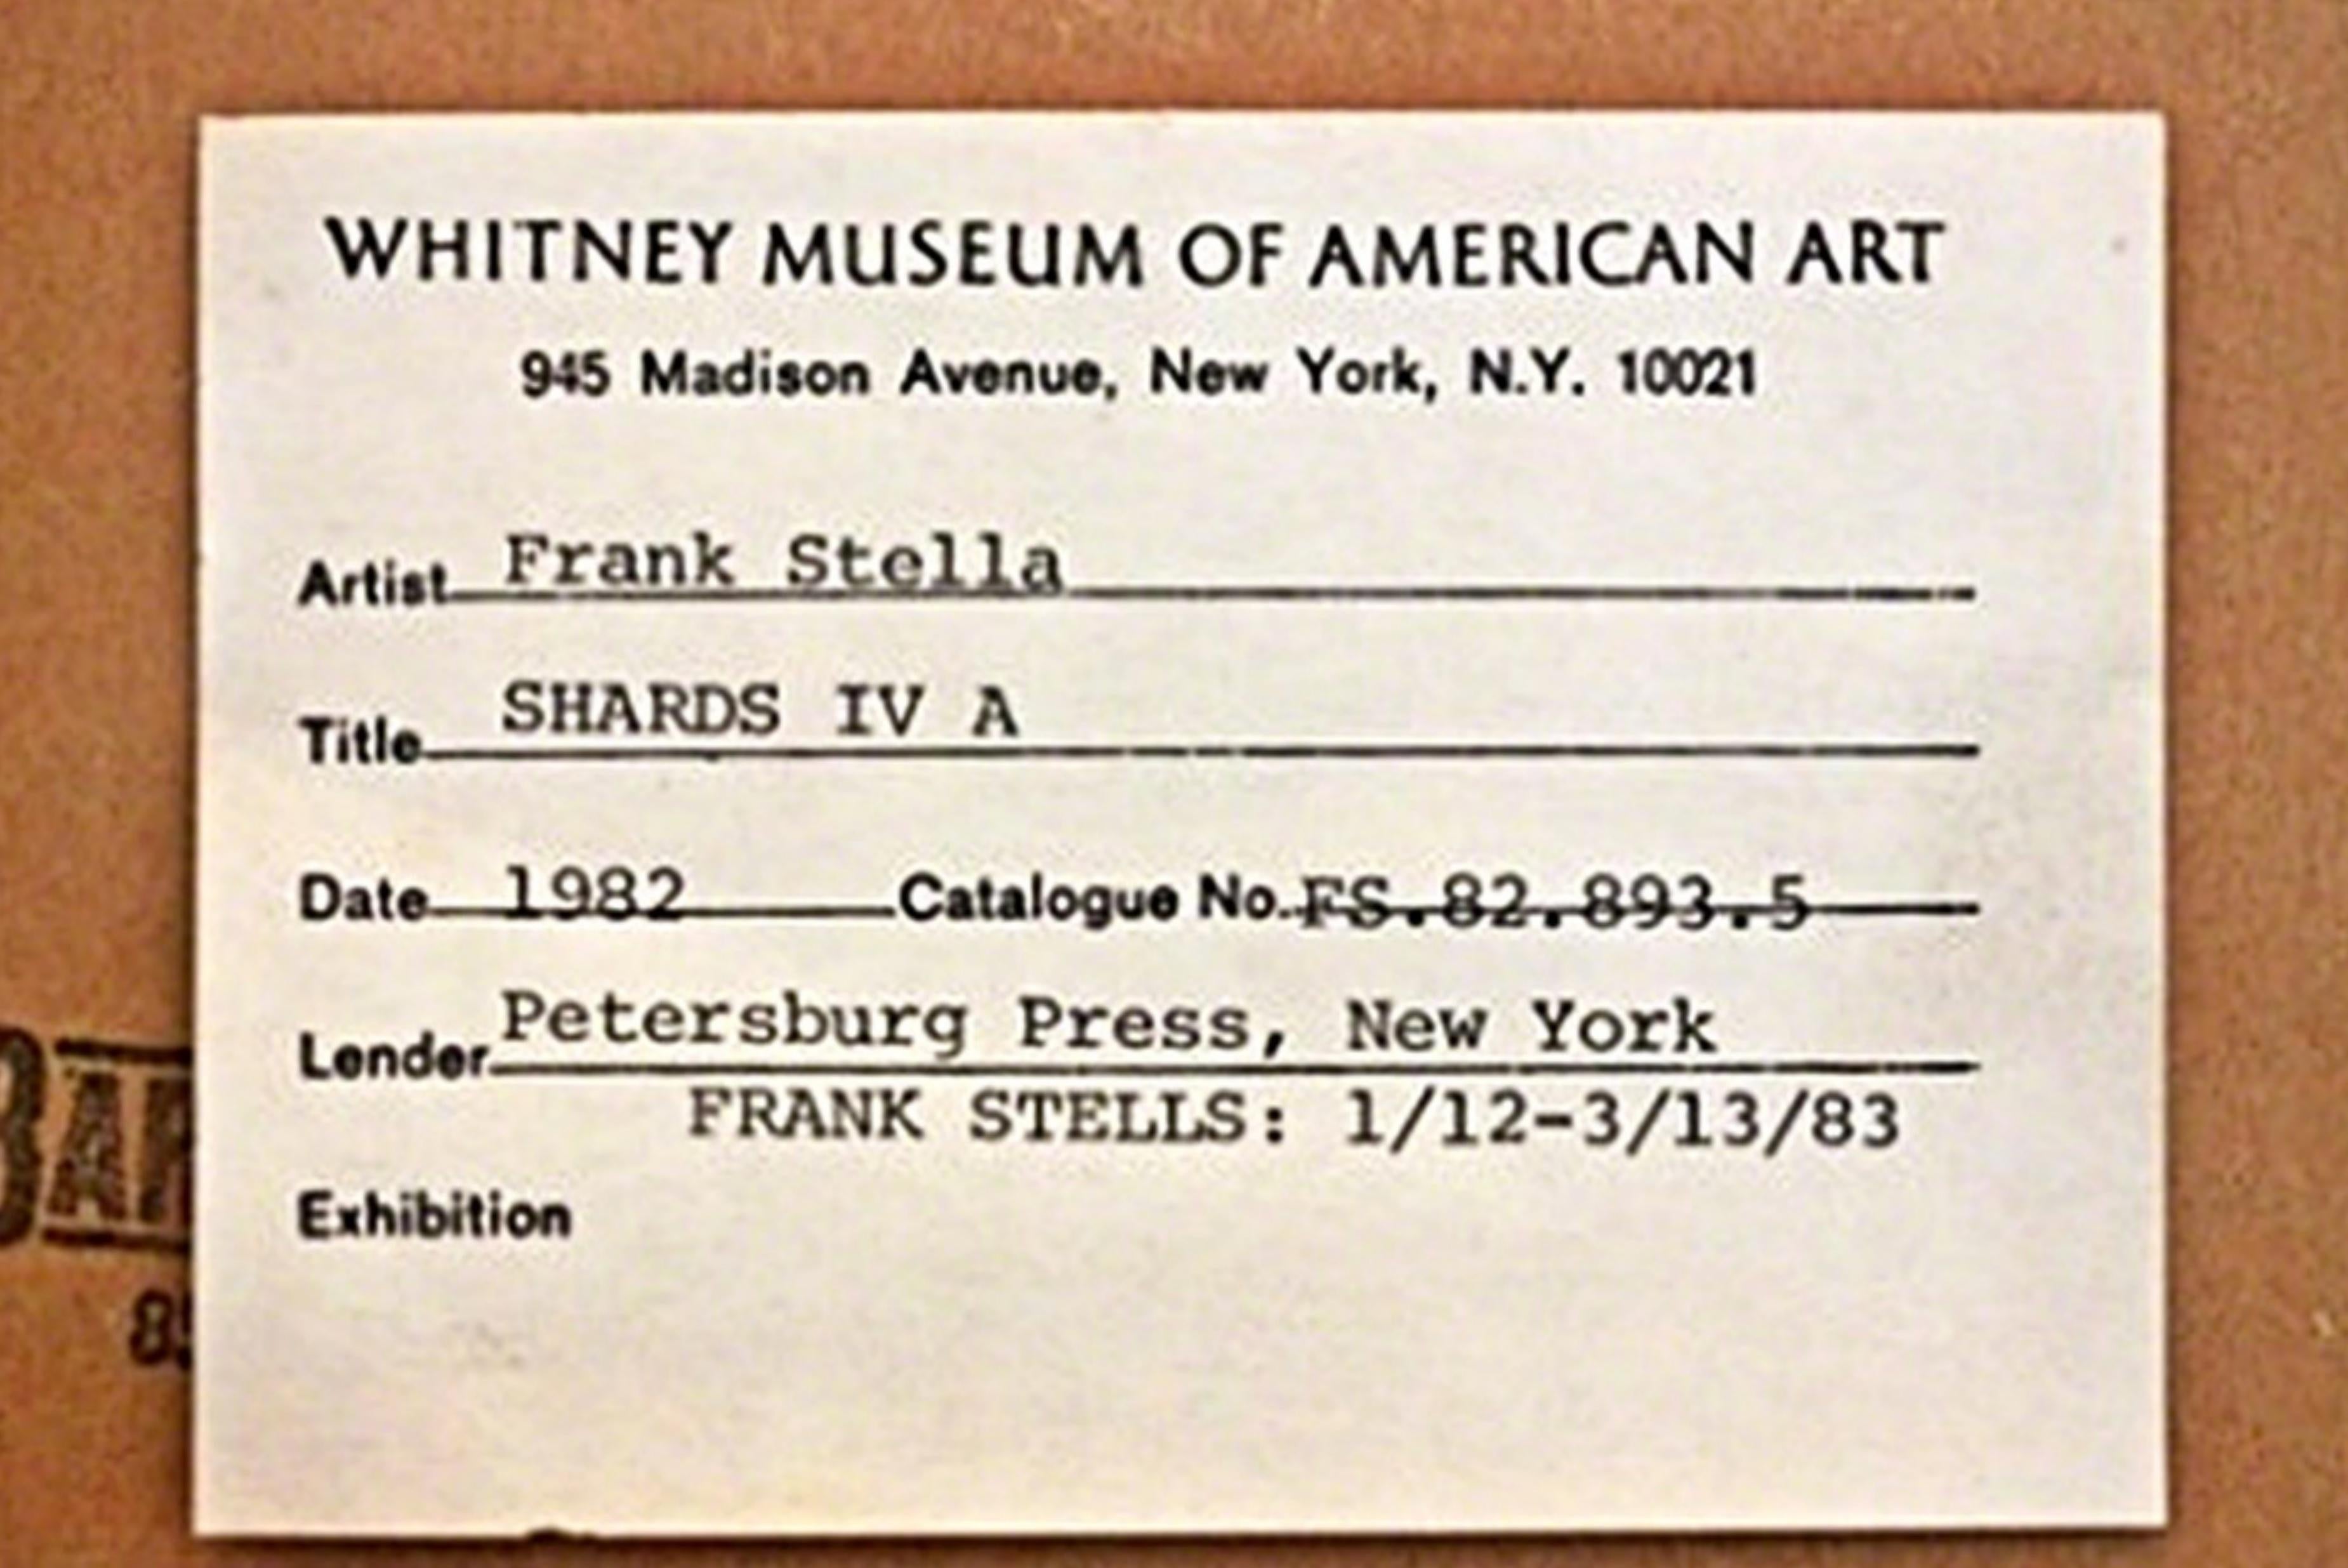 Shards IVA (Axsom 151) exhibited at the Whitney with Museum & Richard Gray label For Sale 1